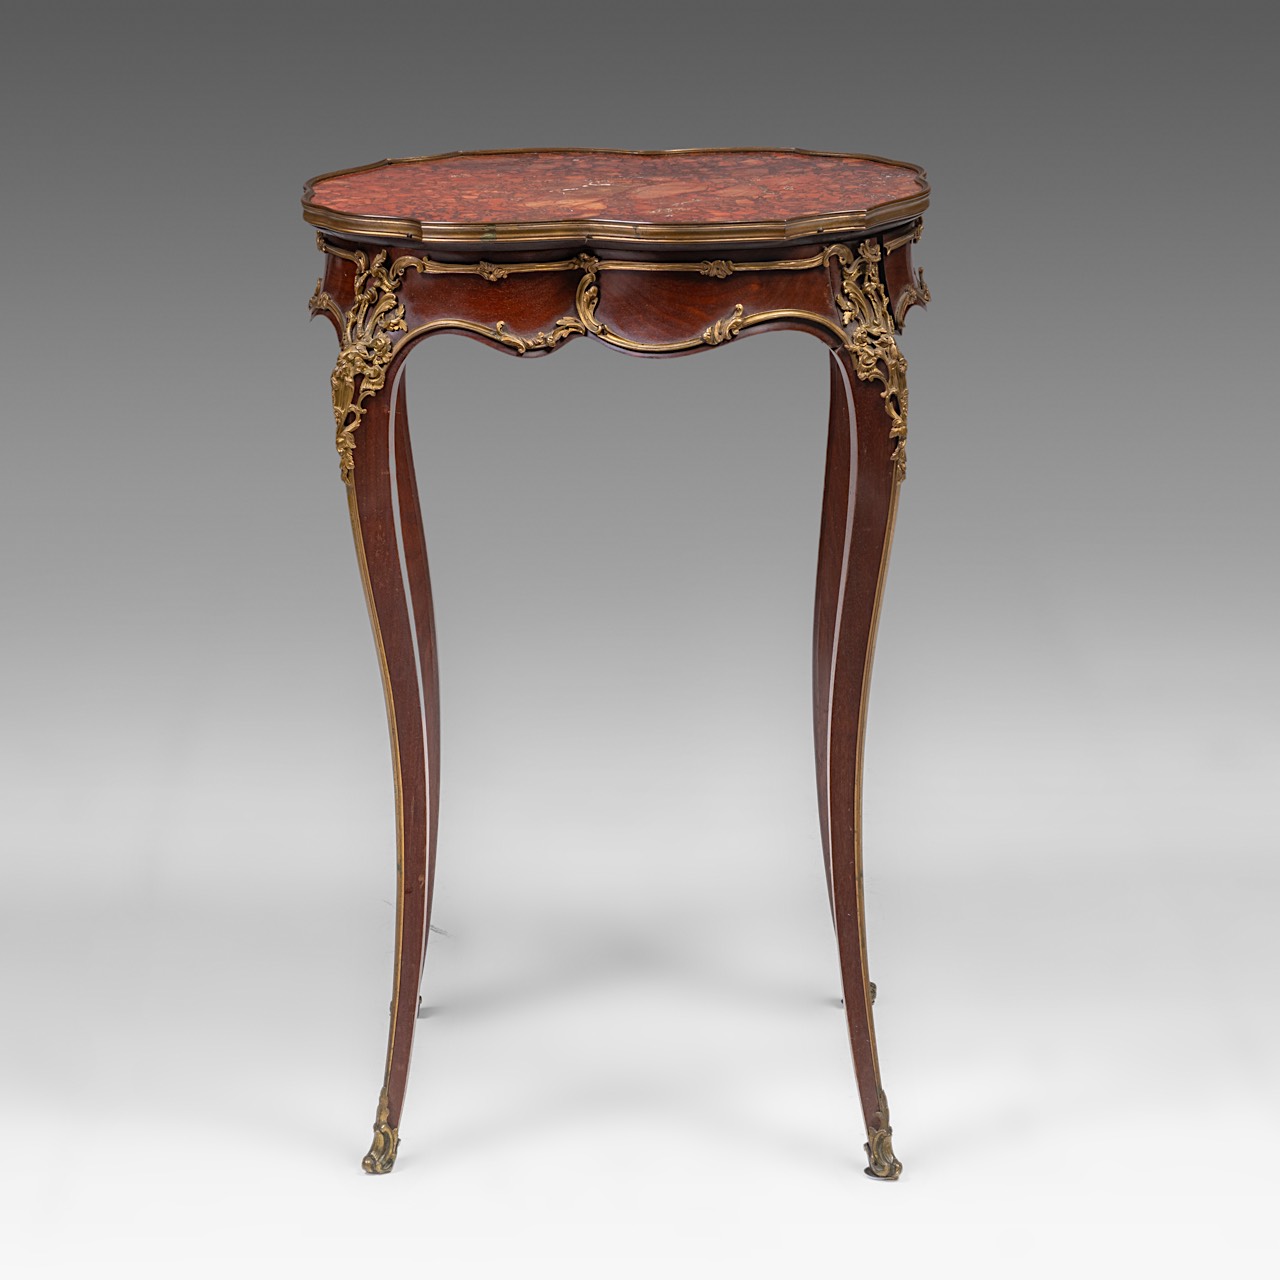 A mahogany marble-topped Louis XV (1723-1774) occasional table with gilt bronze mounts, H 77,5 cm - - Image 2 of 9